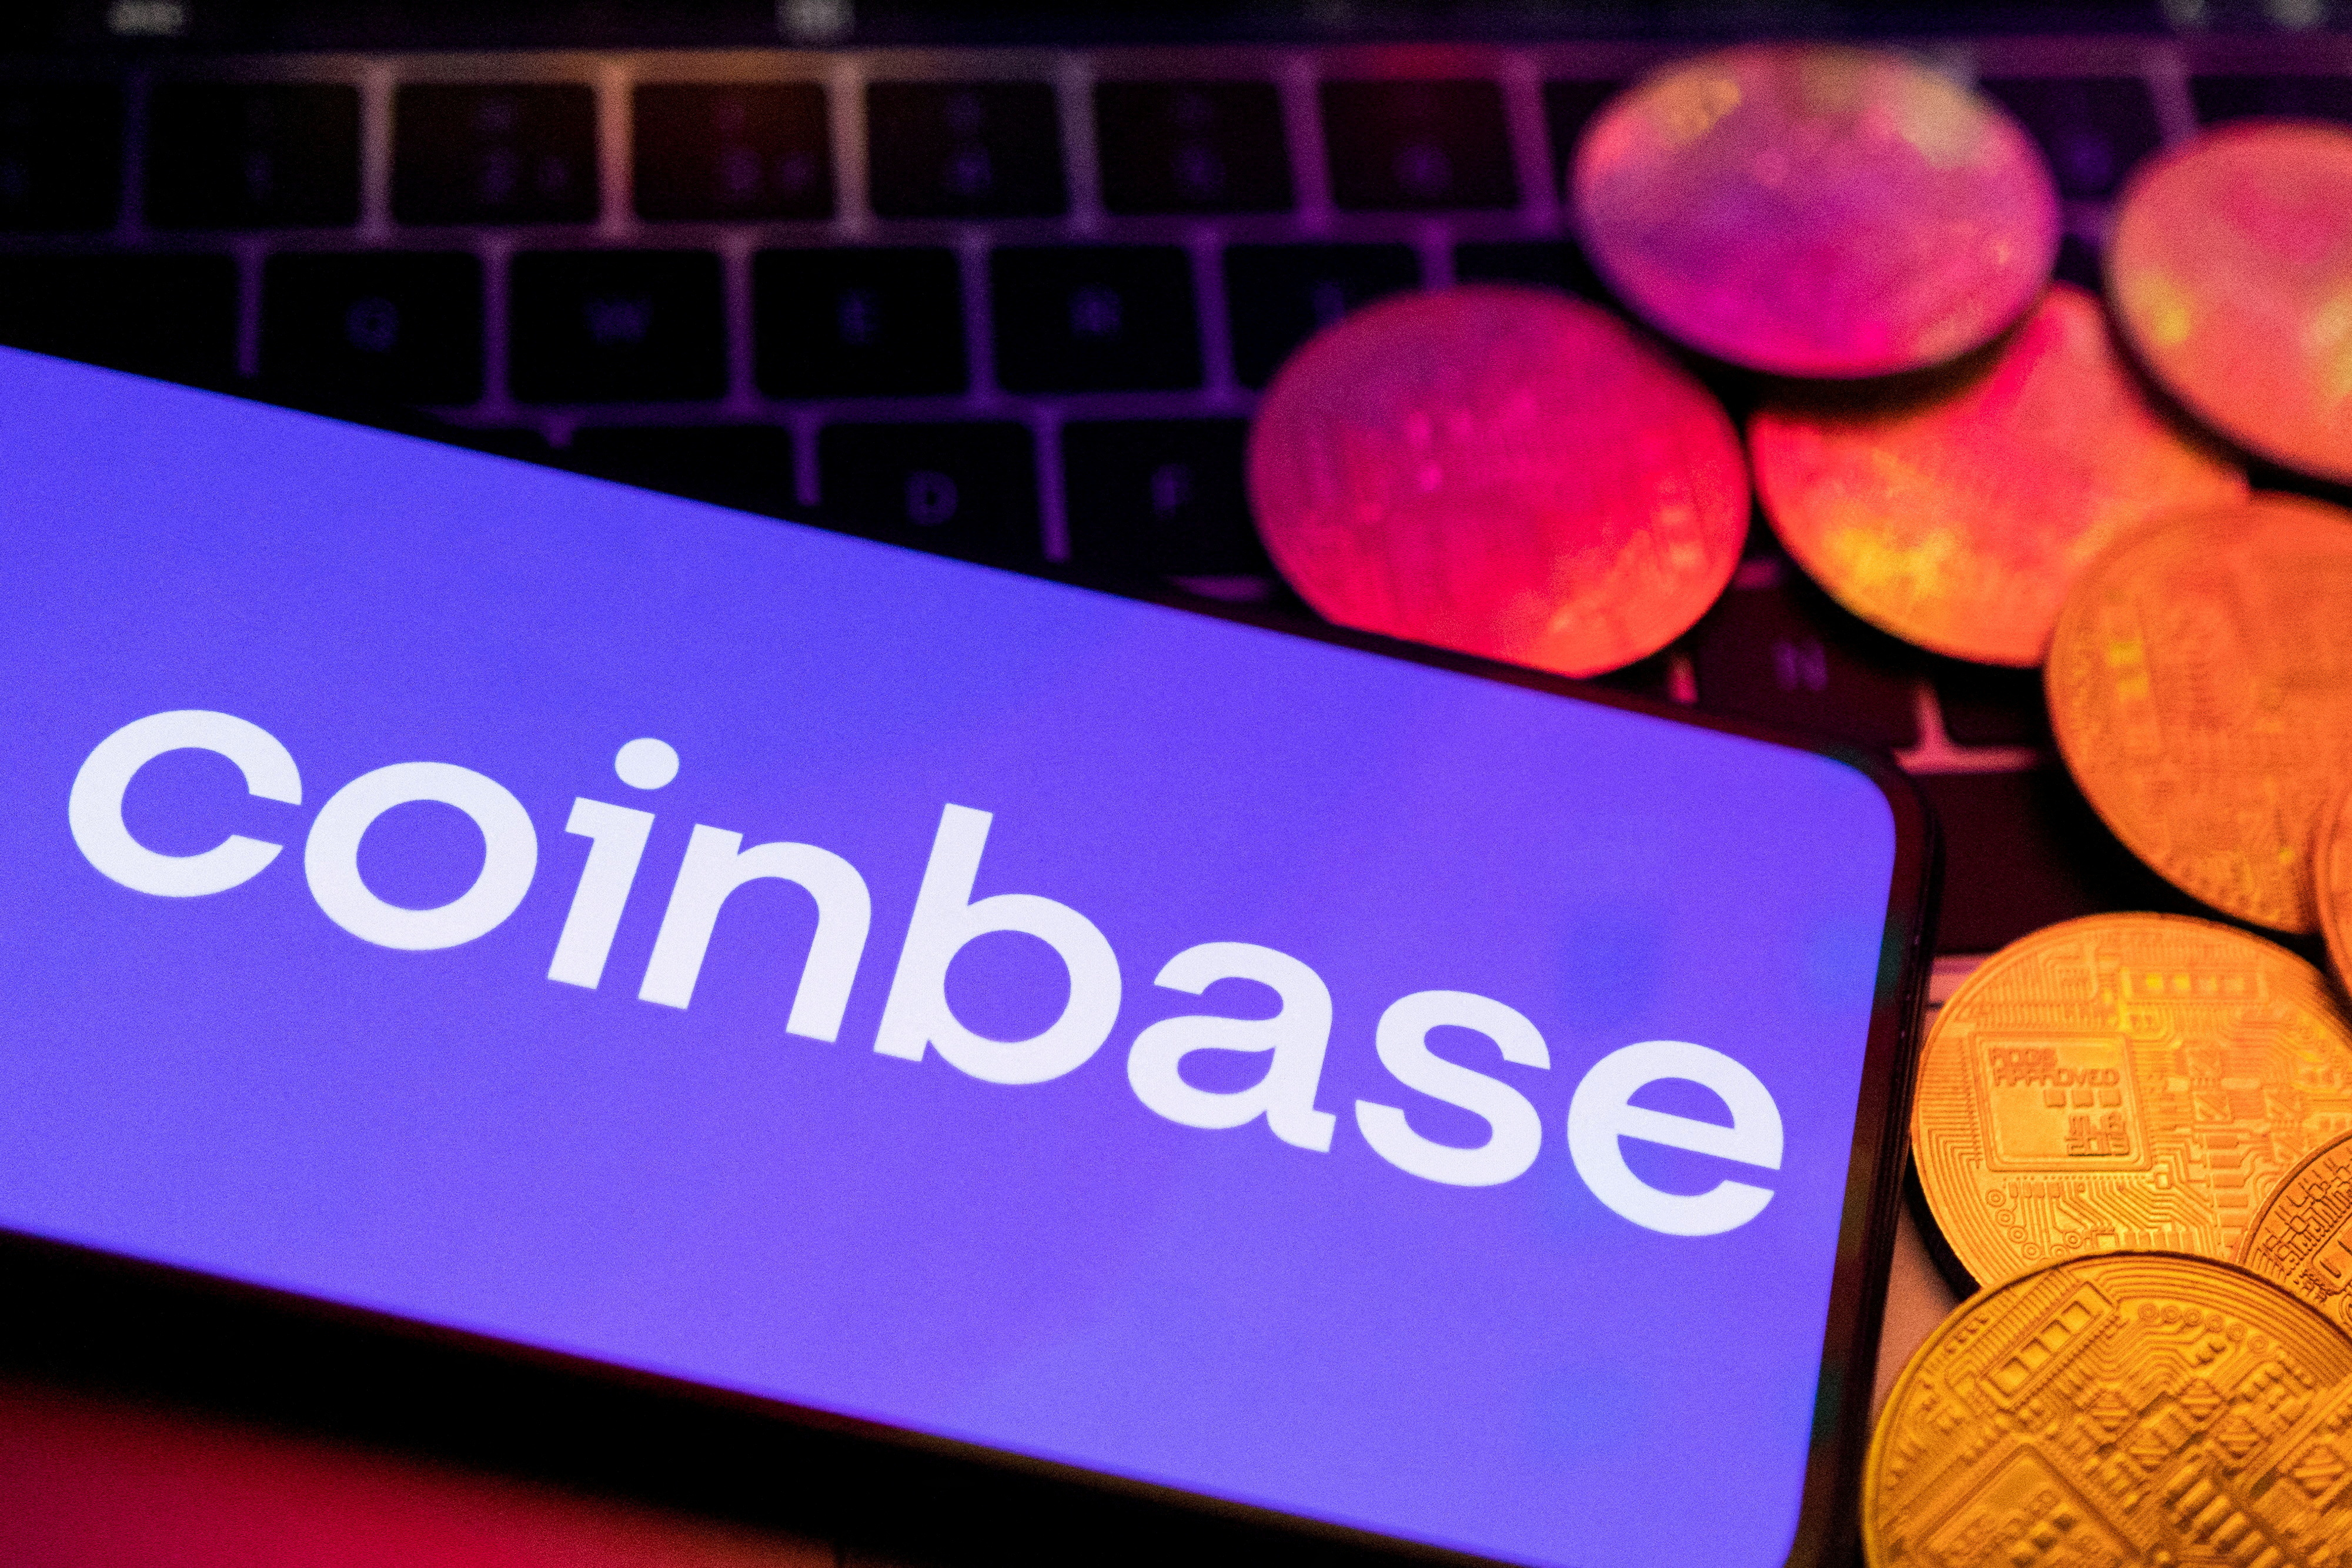 Illustration shows smartphone with displayed Coinbase logo